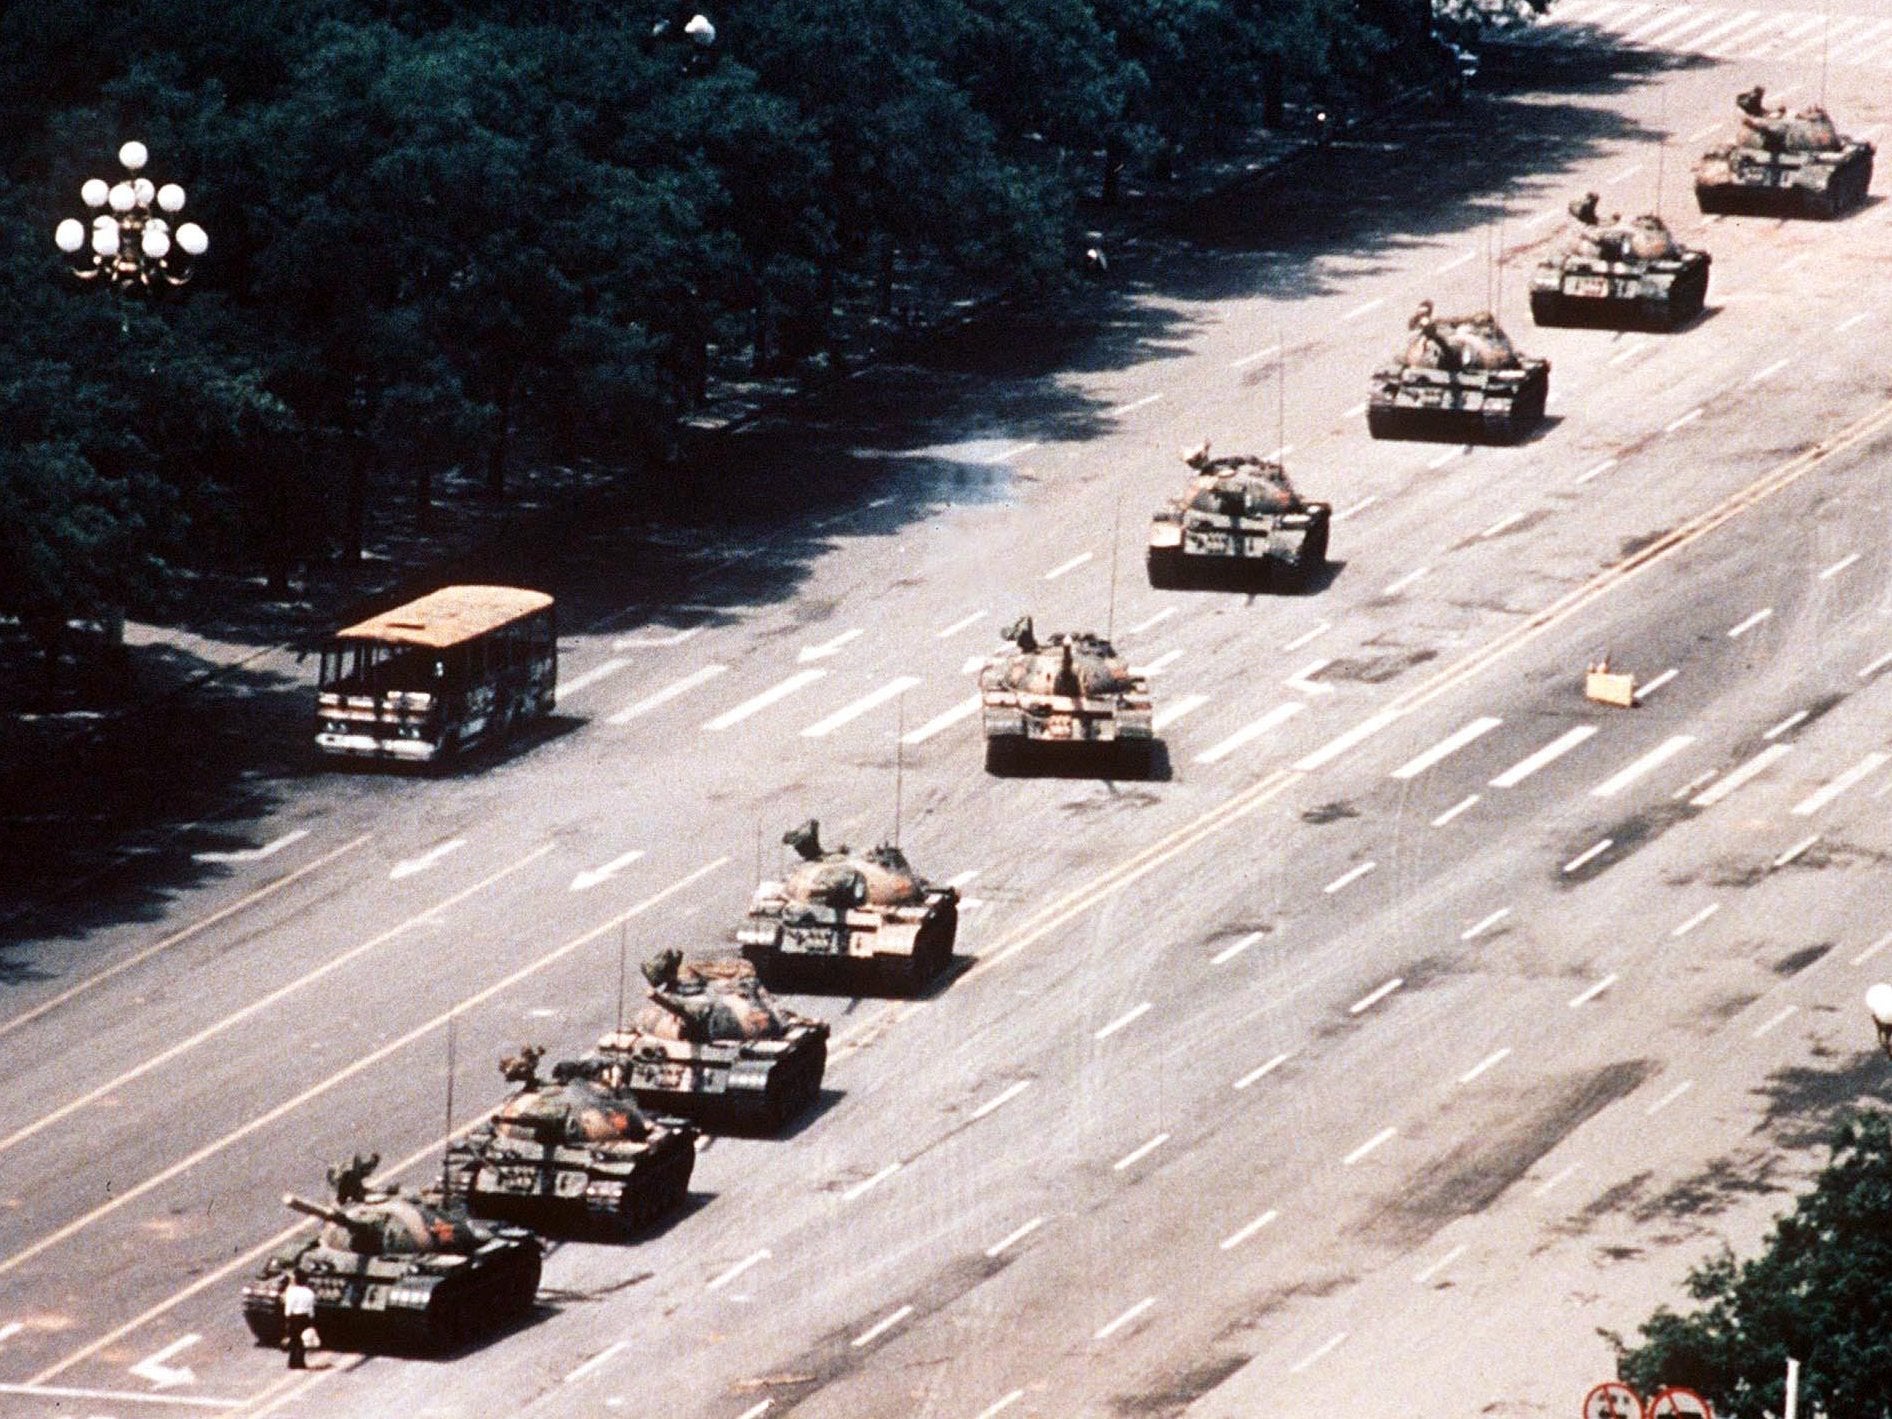 Tanks rolling into Tiananmen Square in Beijing to quell pro-democracy demonstrations – one of the most memorable and important international stories in post-war history